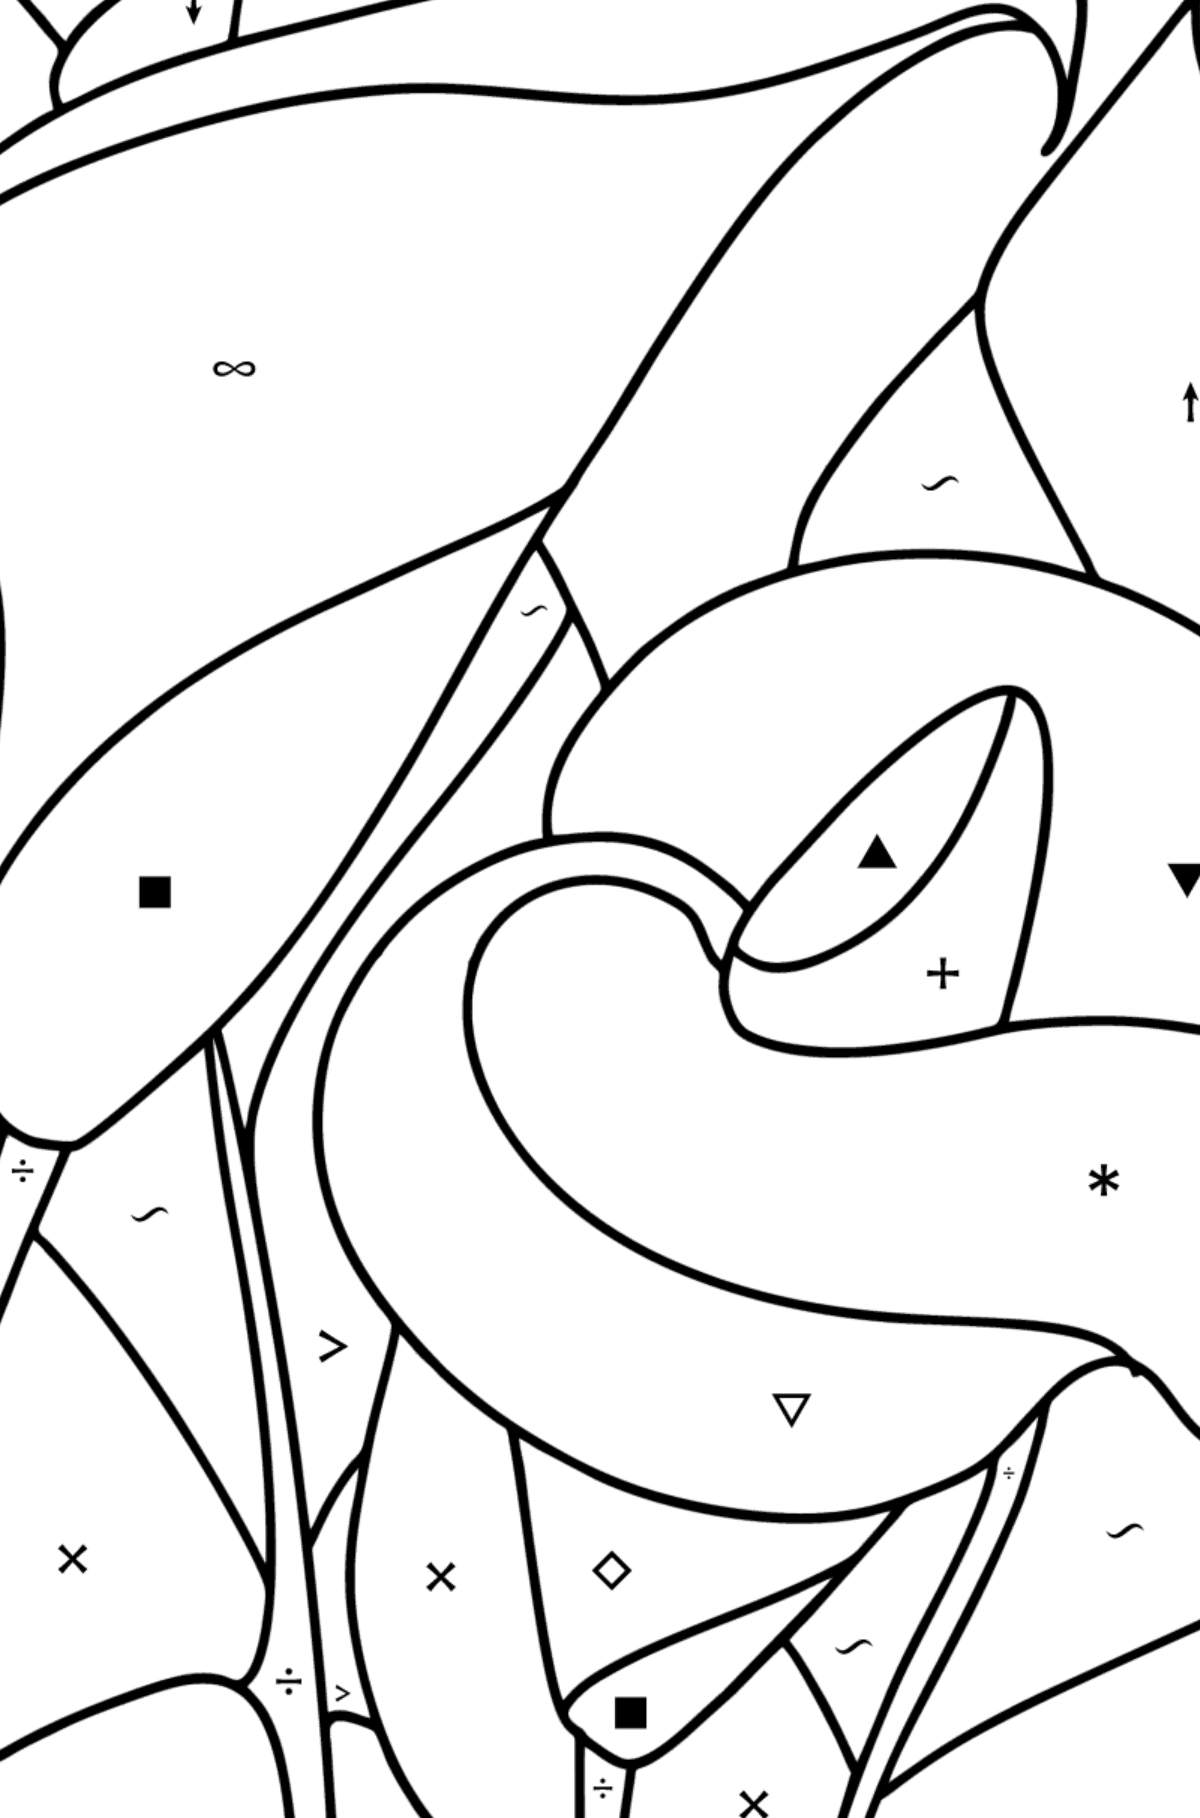 Calla coloring page - Coloring by Symbols for Kids